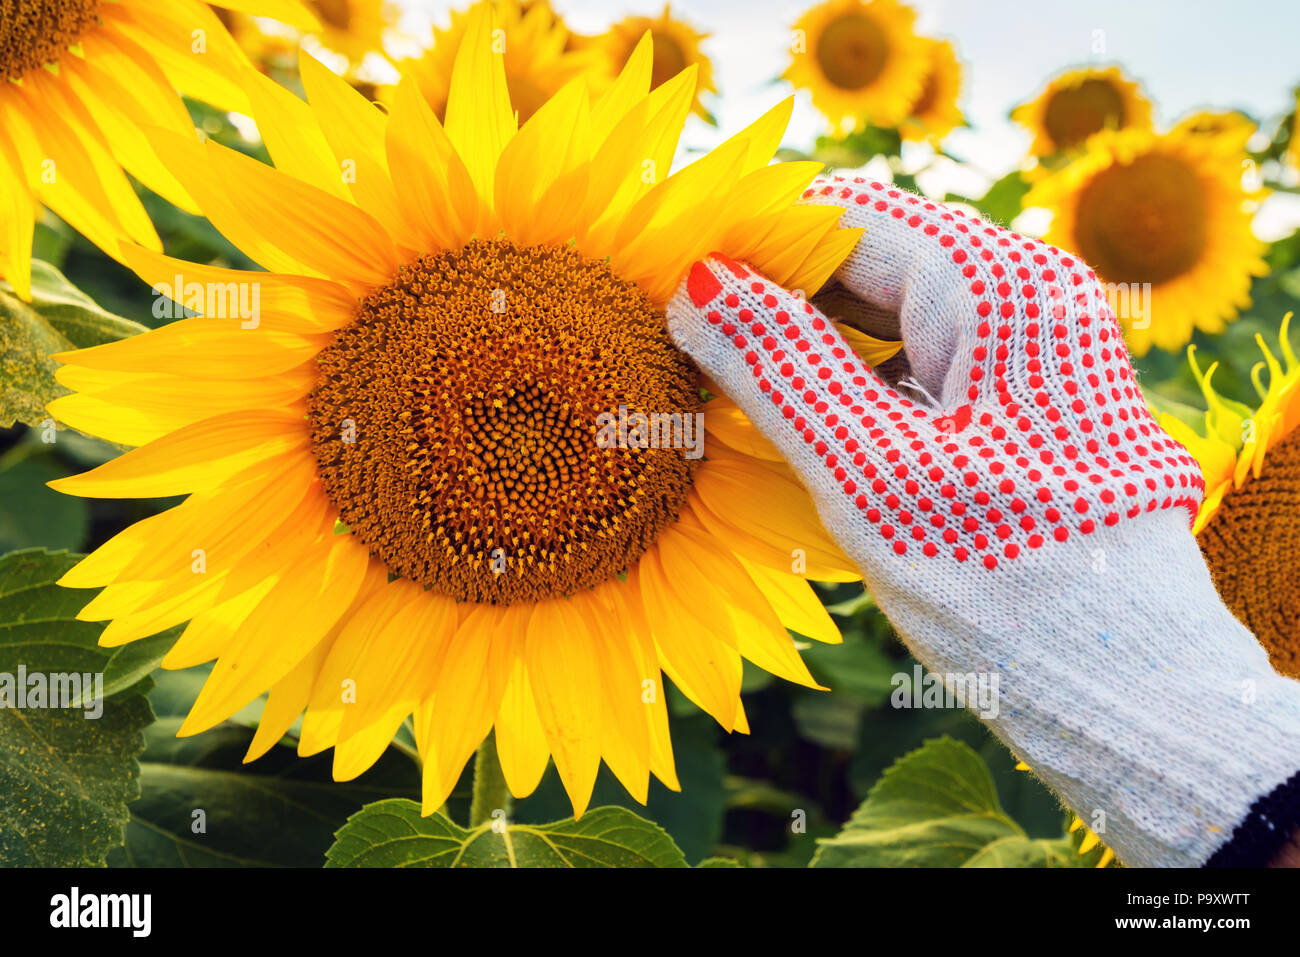 Sunflower crop protection, farmer examining flower head in cultivated field Stock Photo